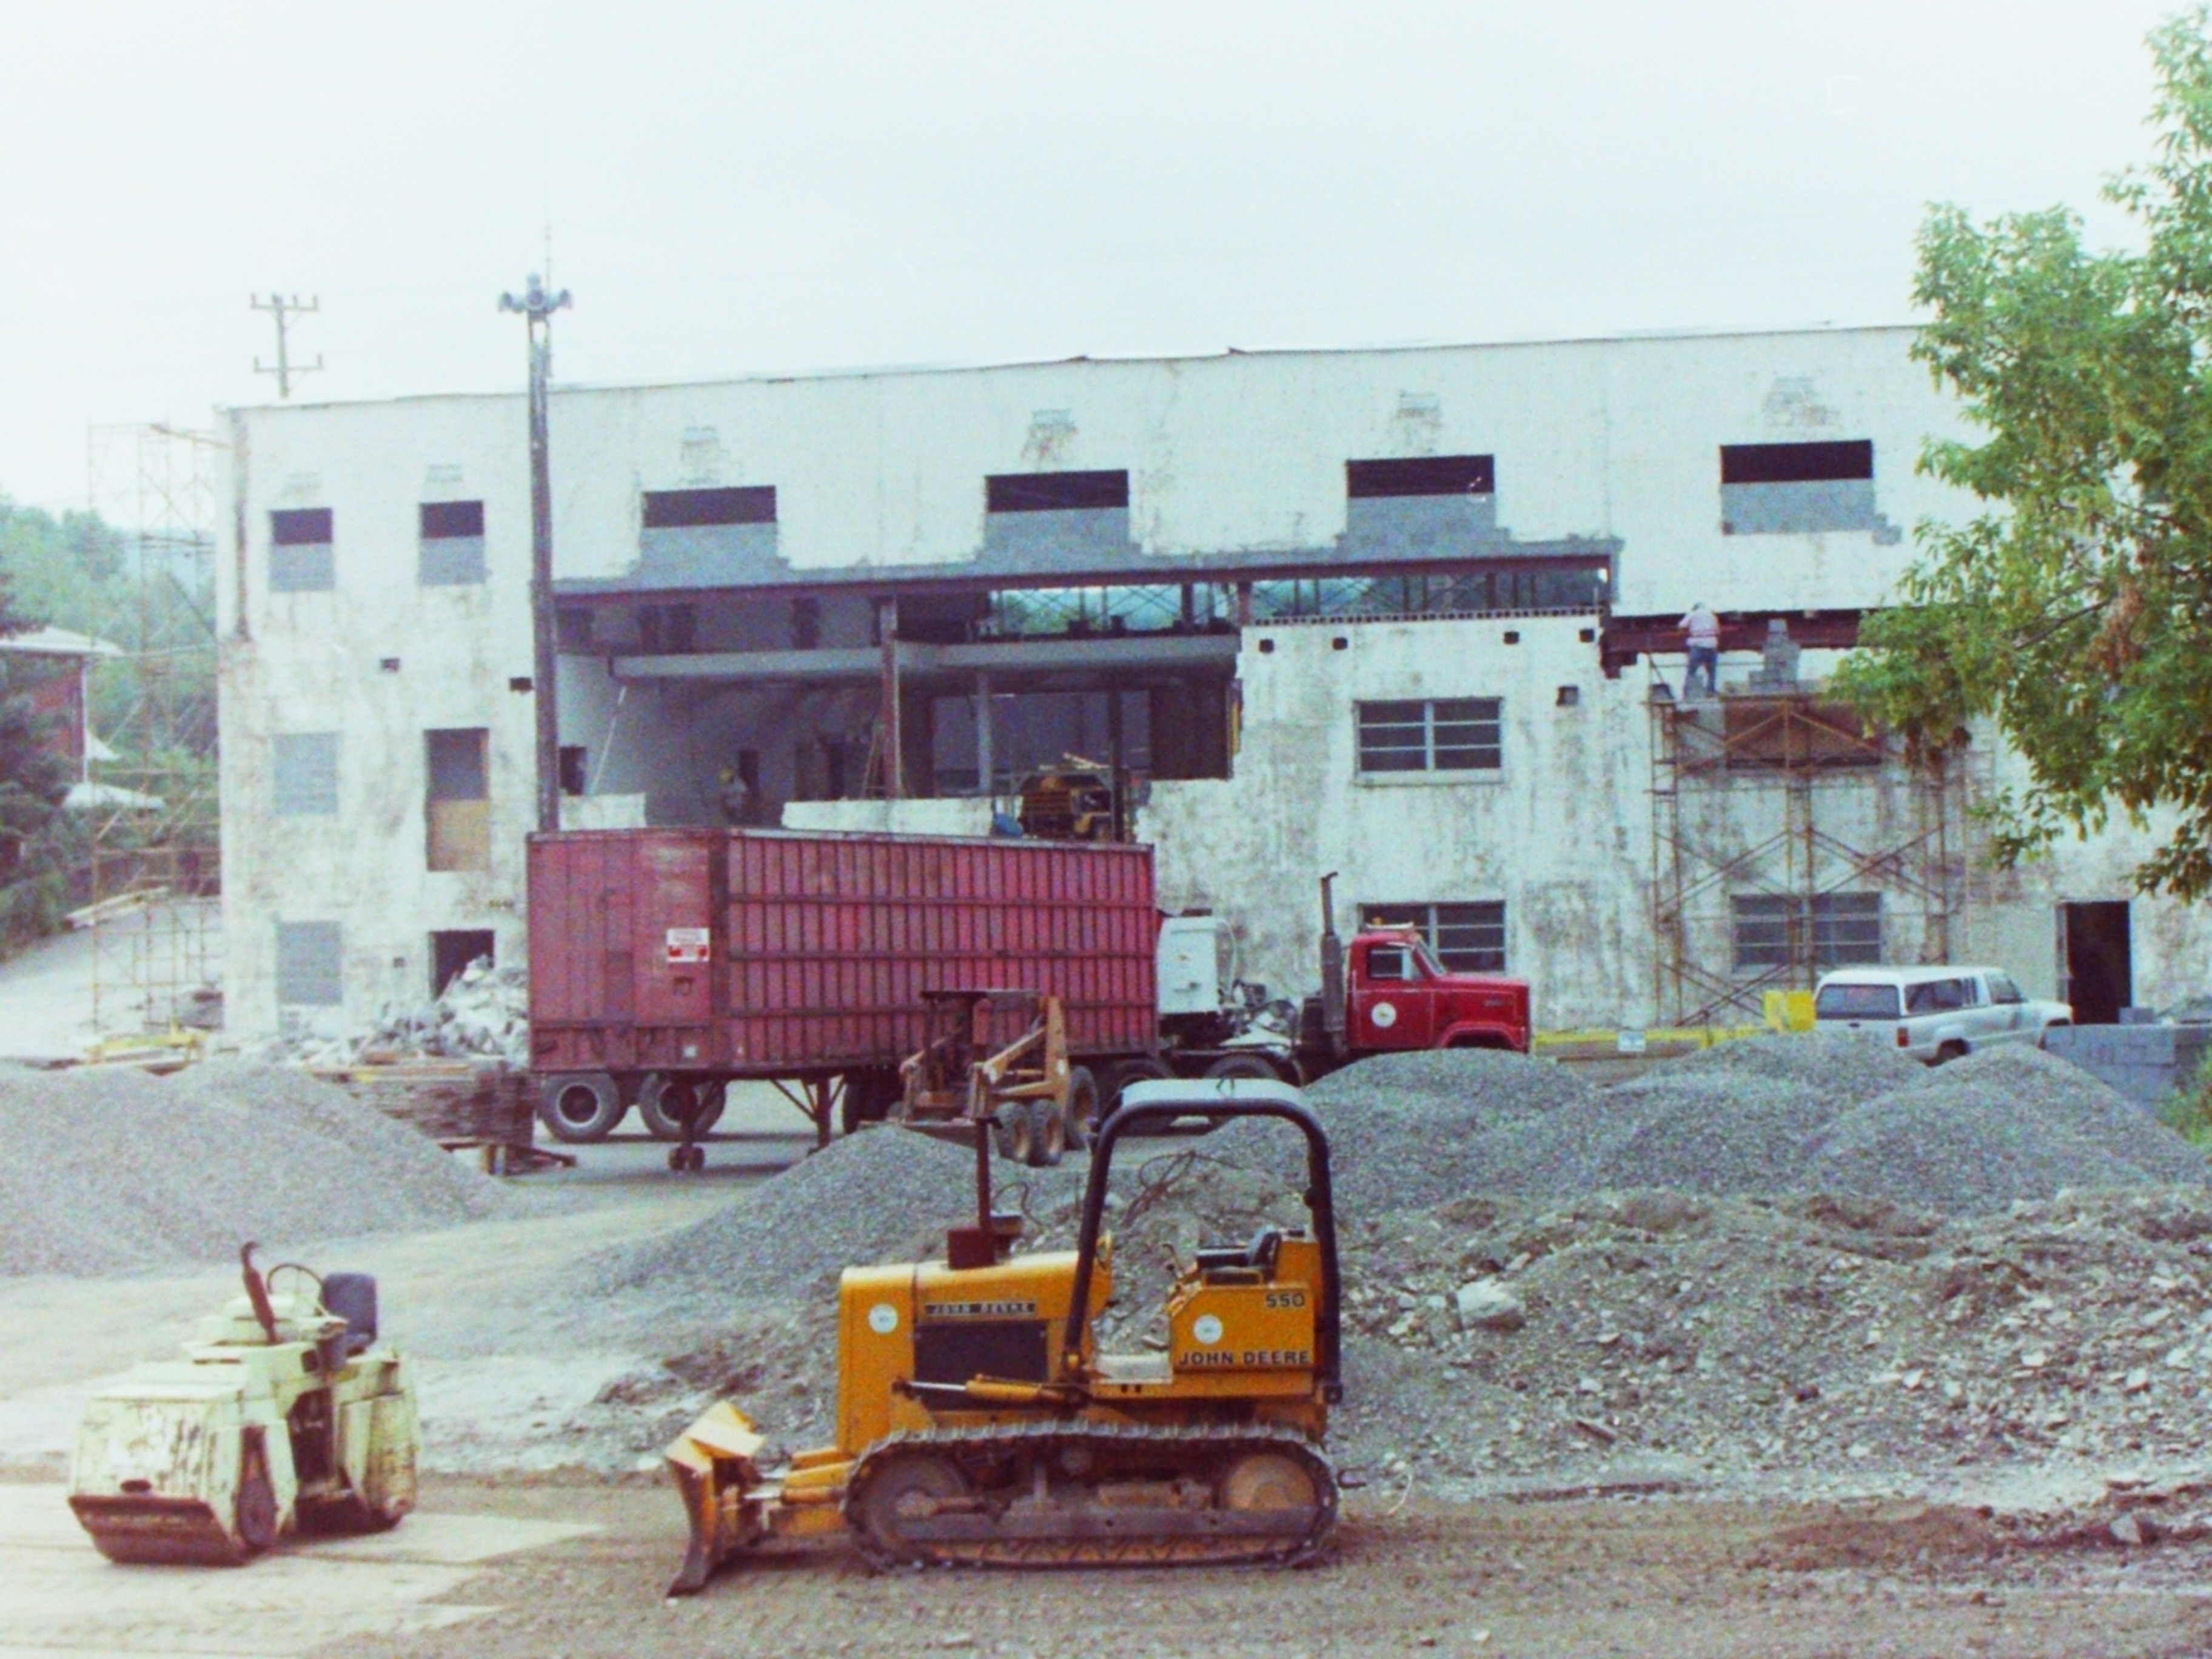 08-19-91  Other - Renovations